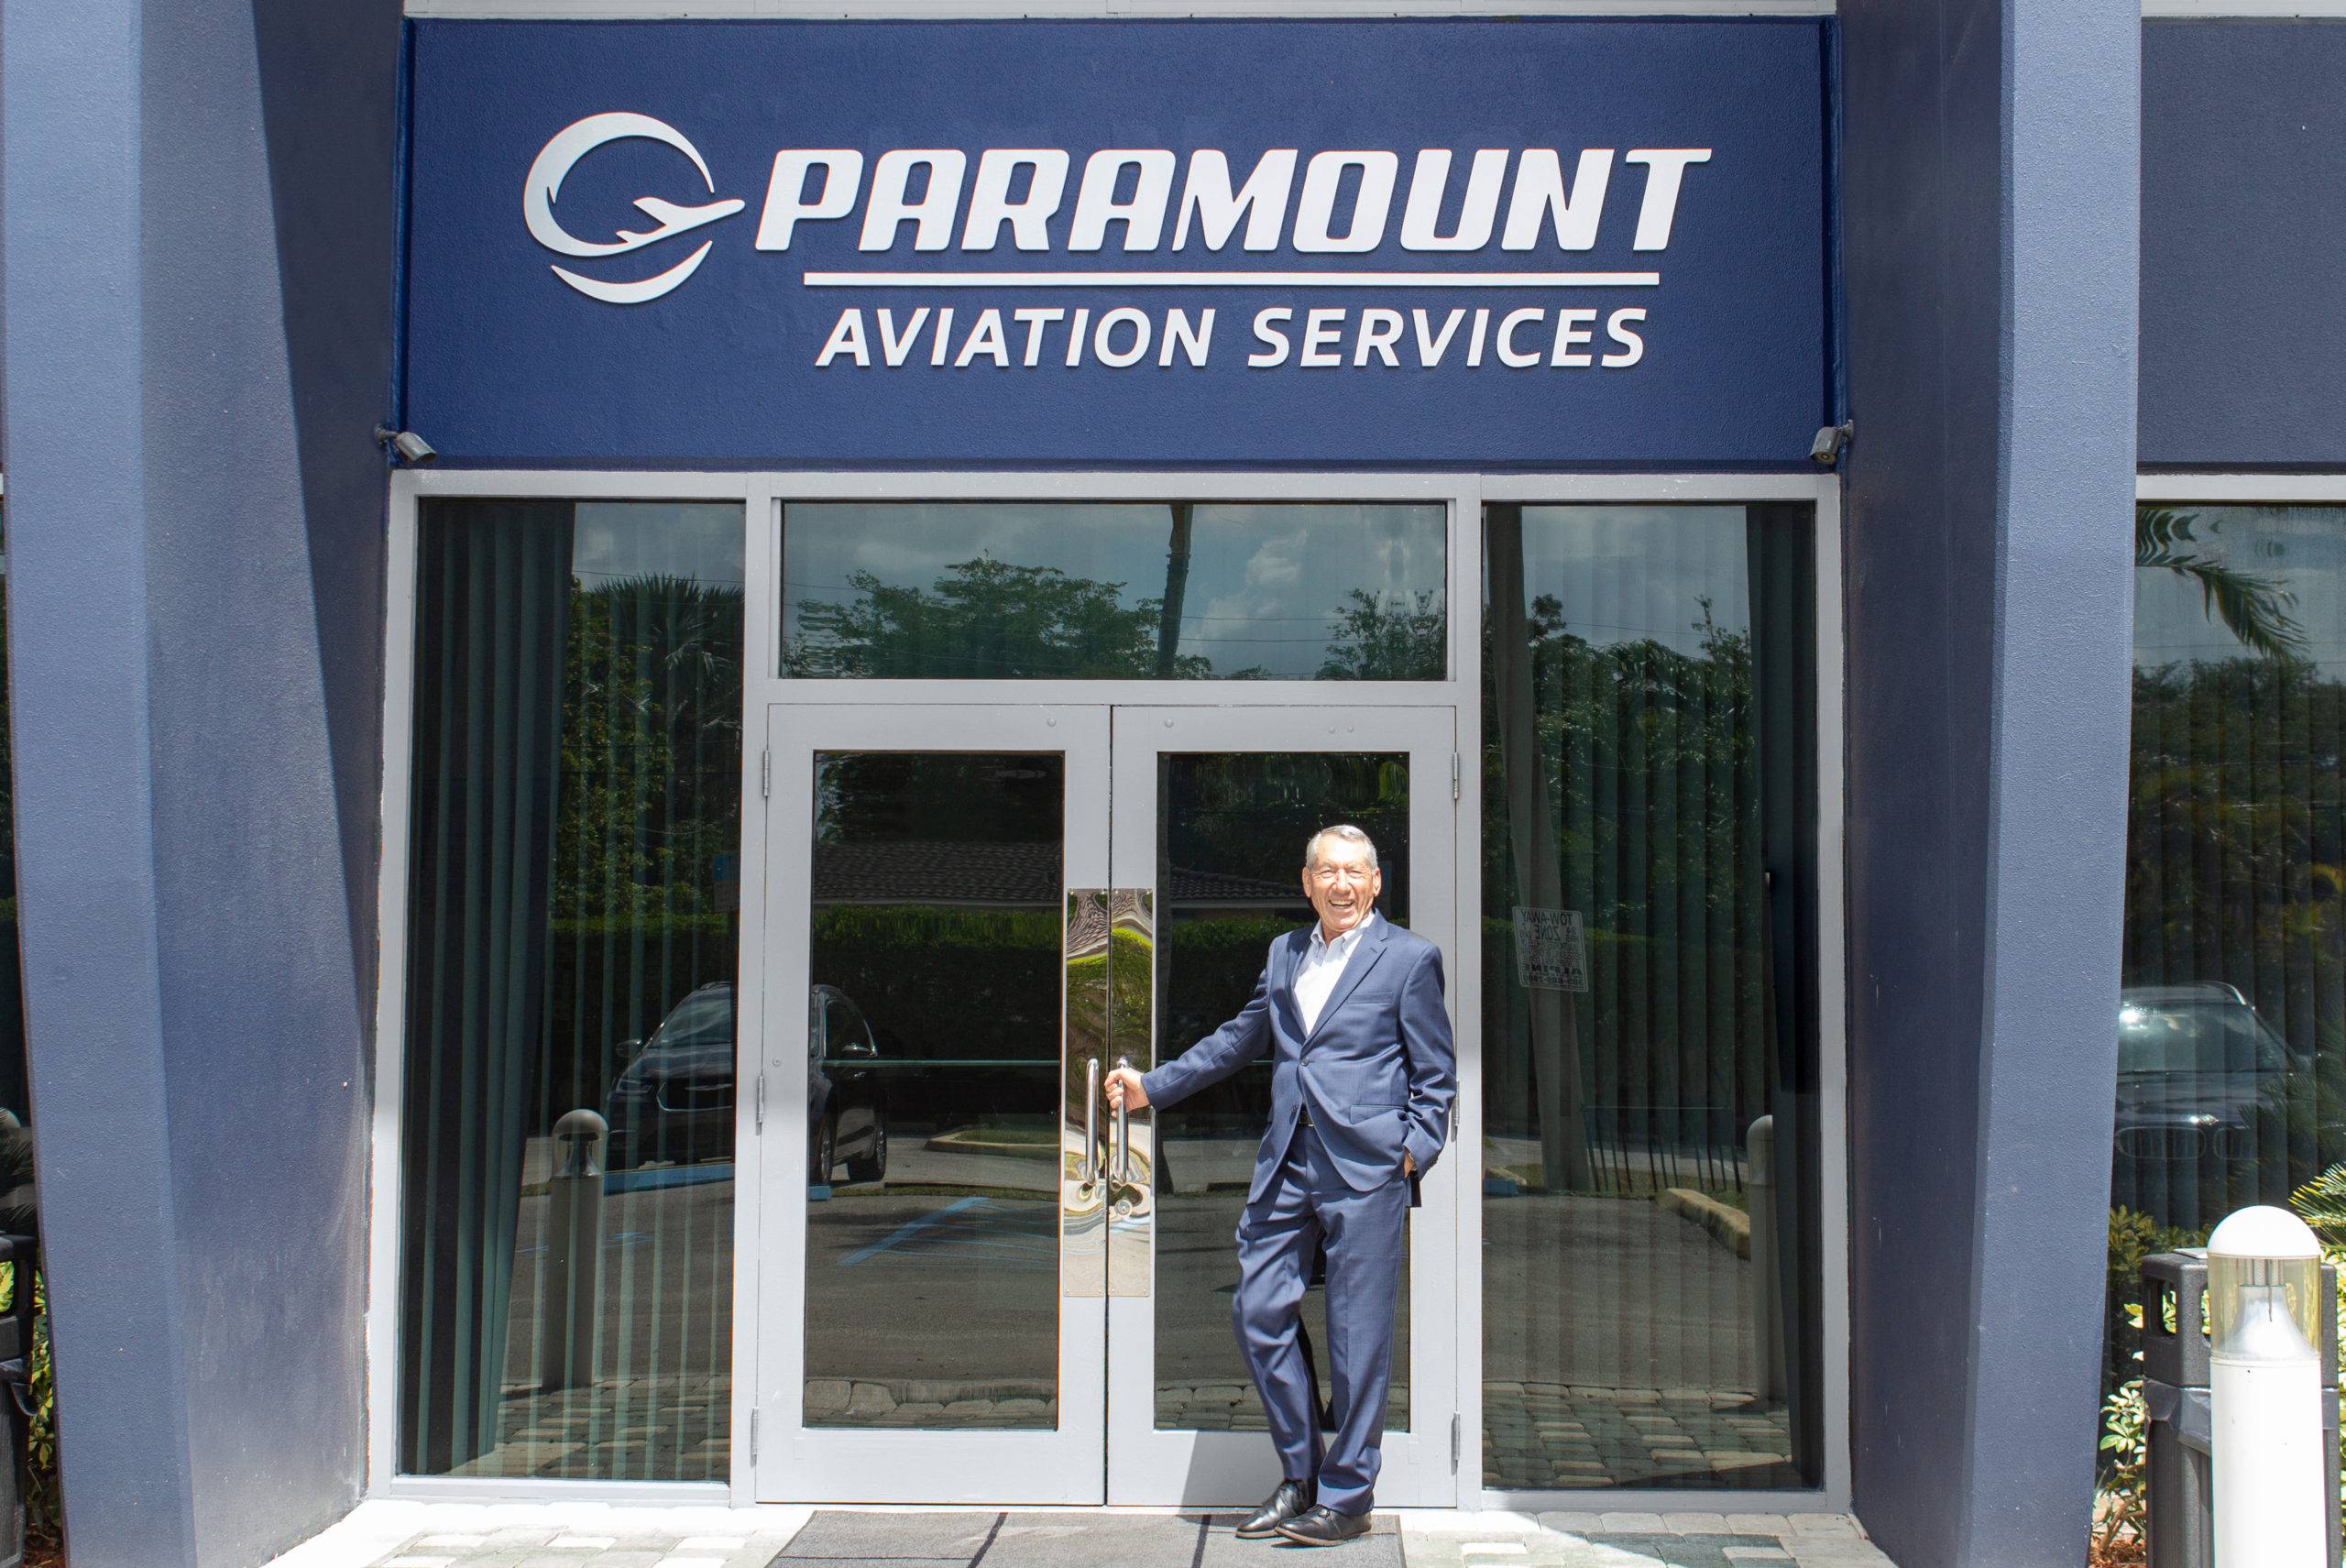 Vito La Forgia, the Chairman of Paramount, standing in front of our Miami, FL campus